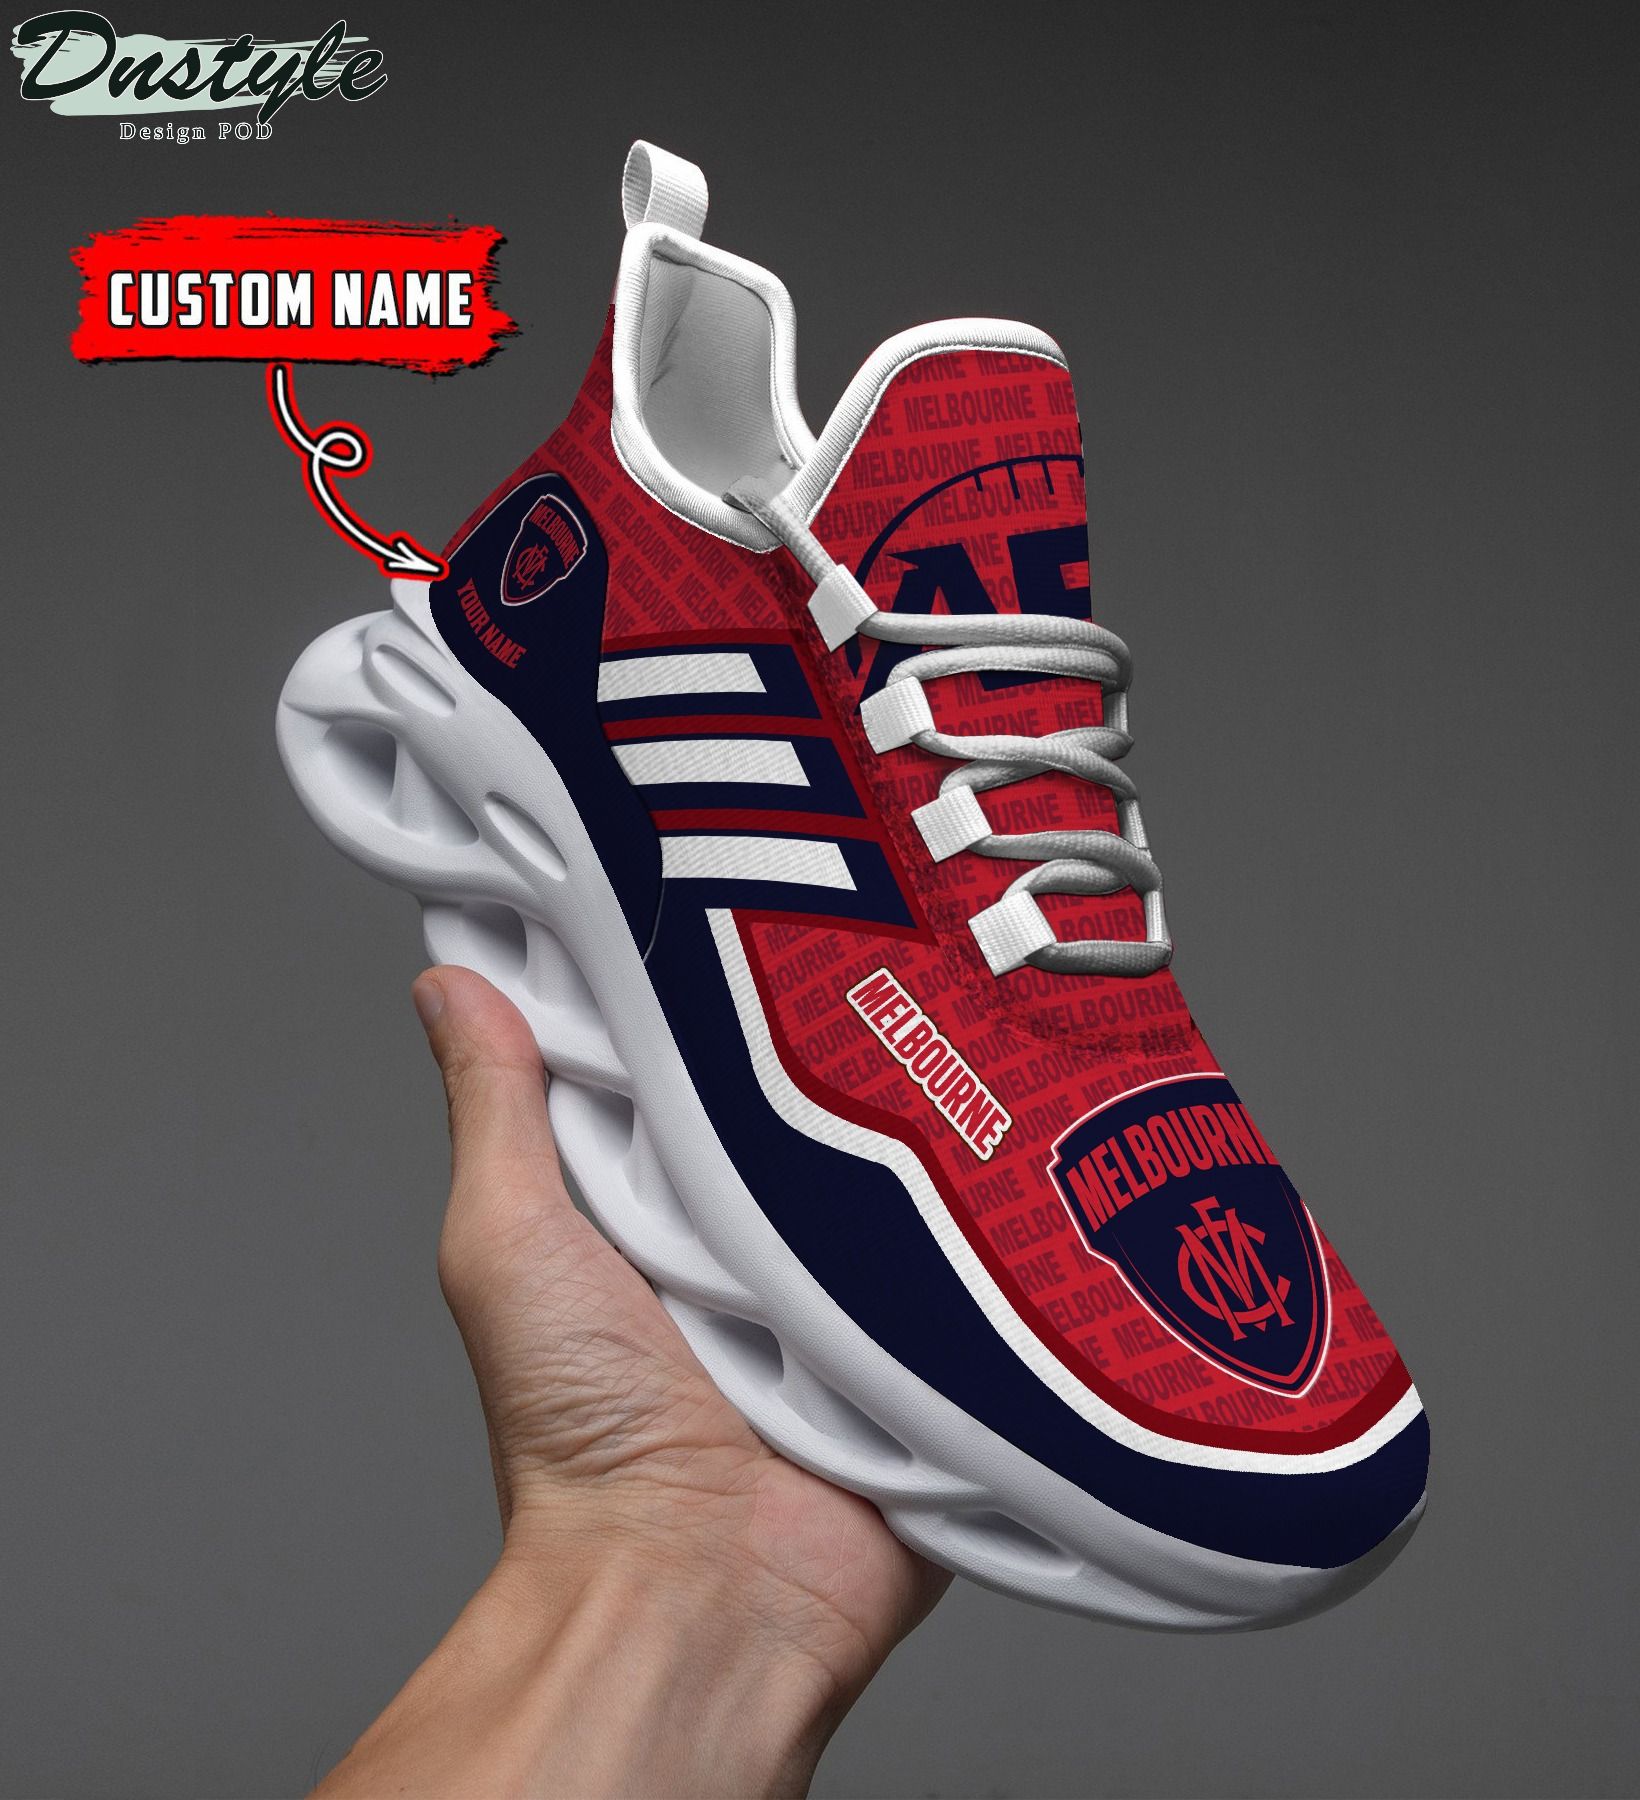 Melbourne AFL personalized clunky max soul shoes